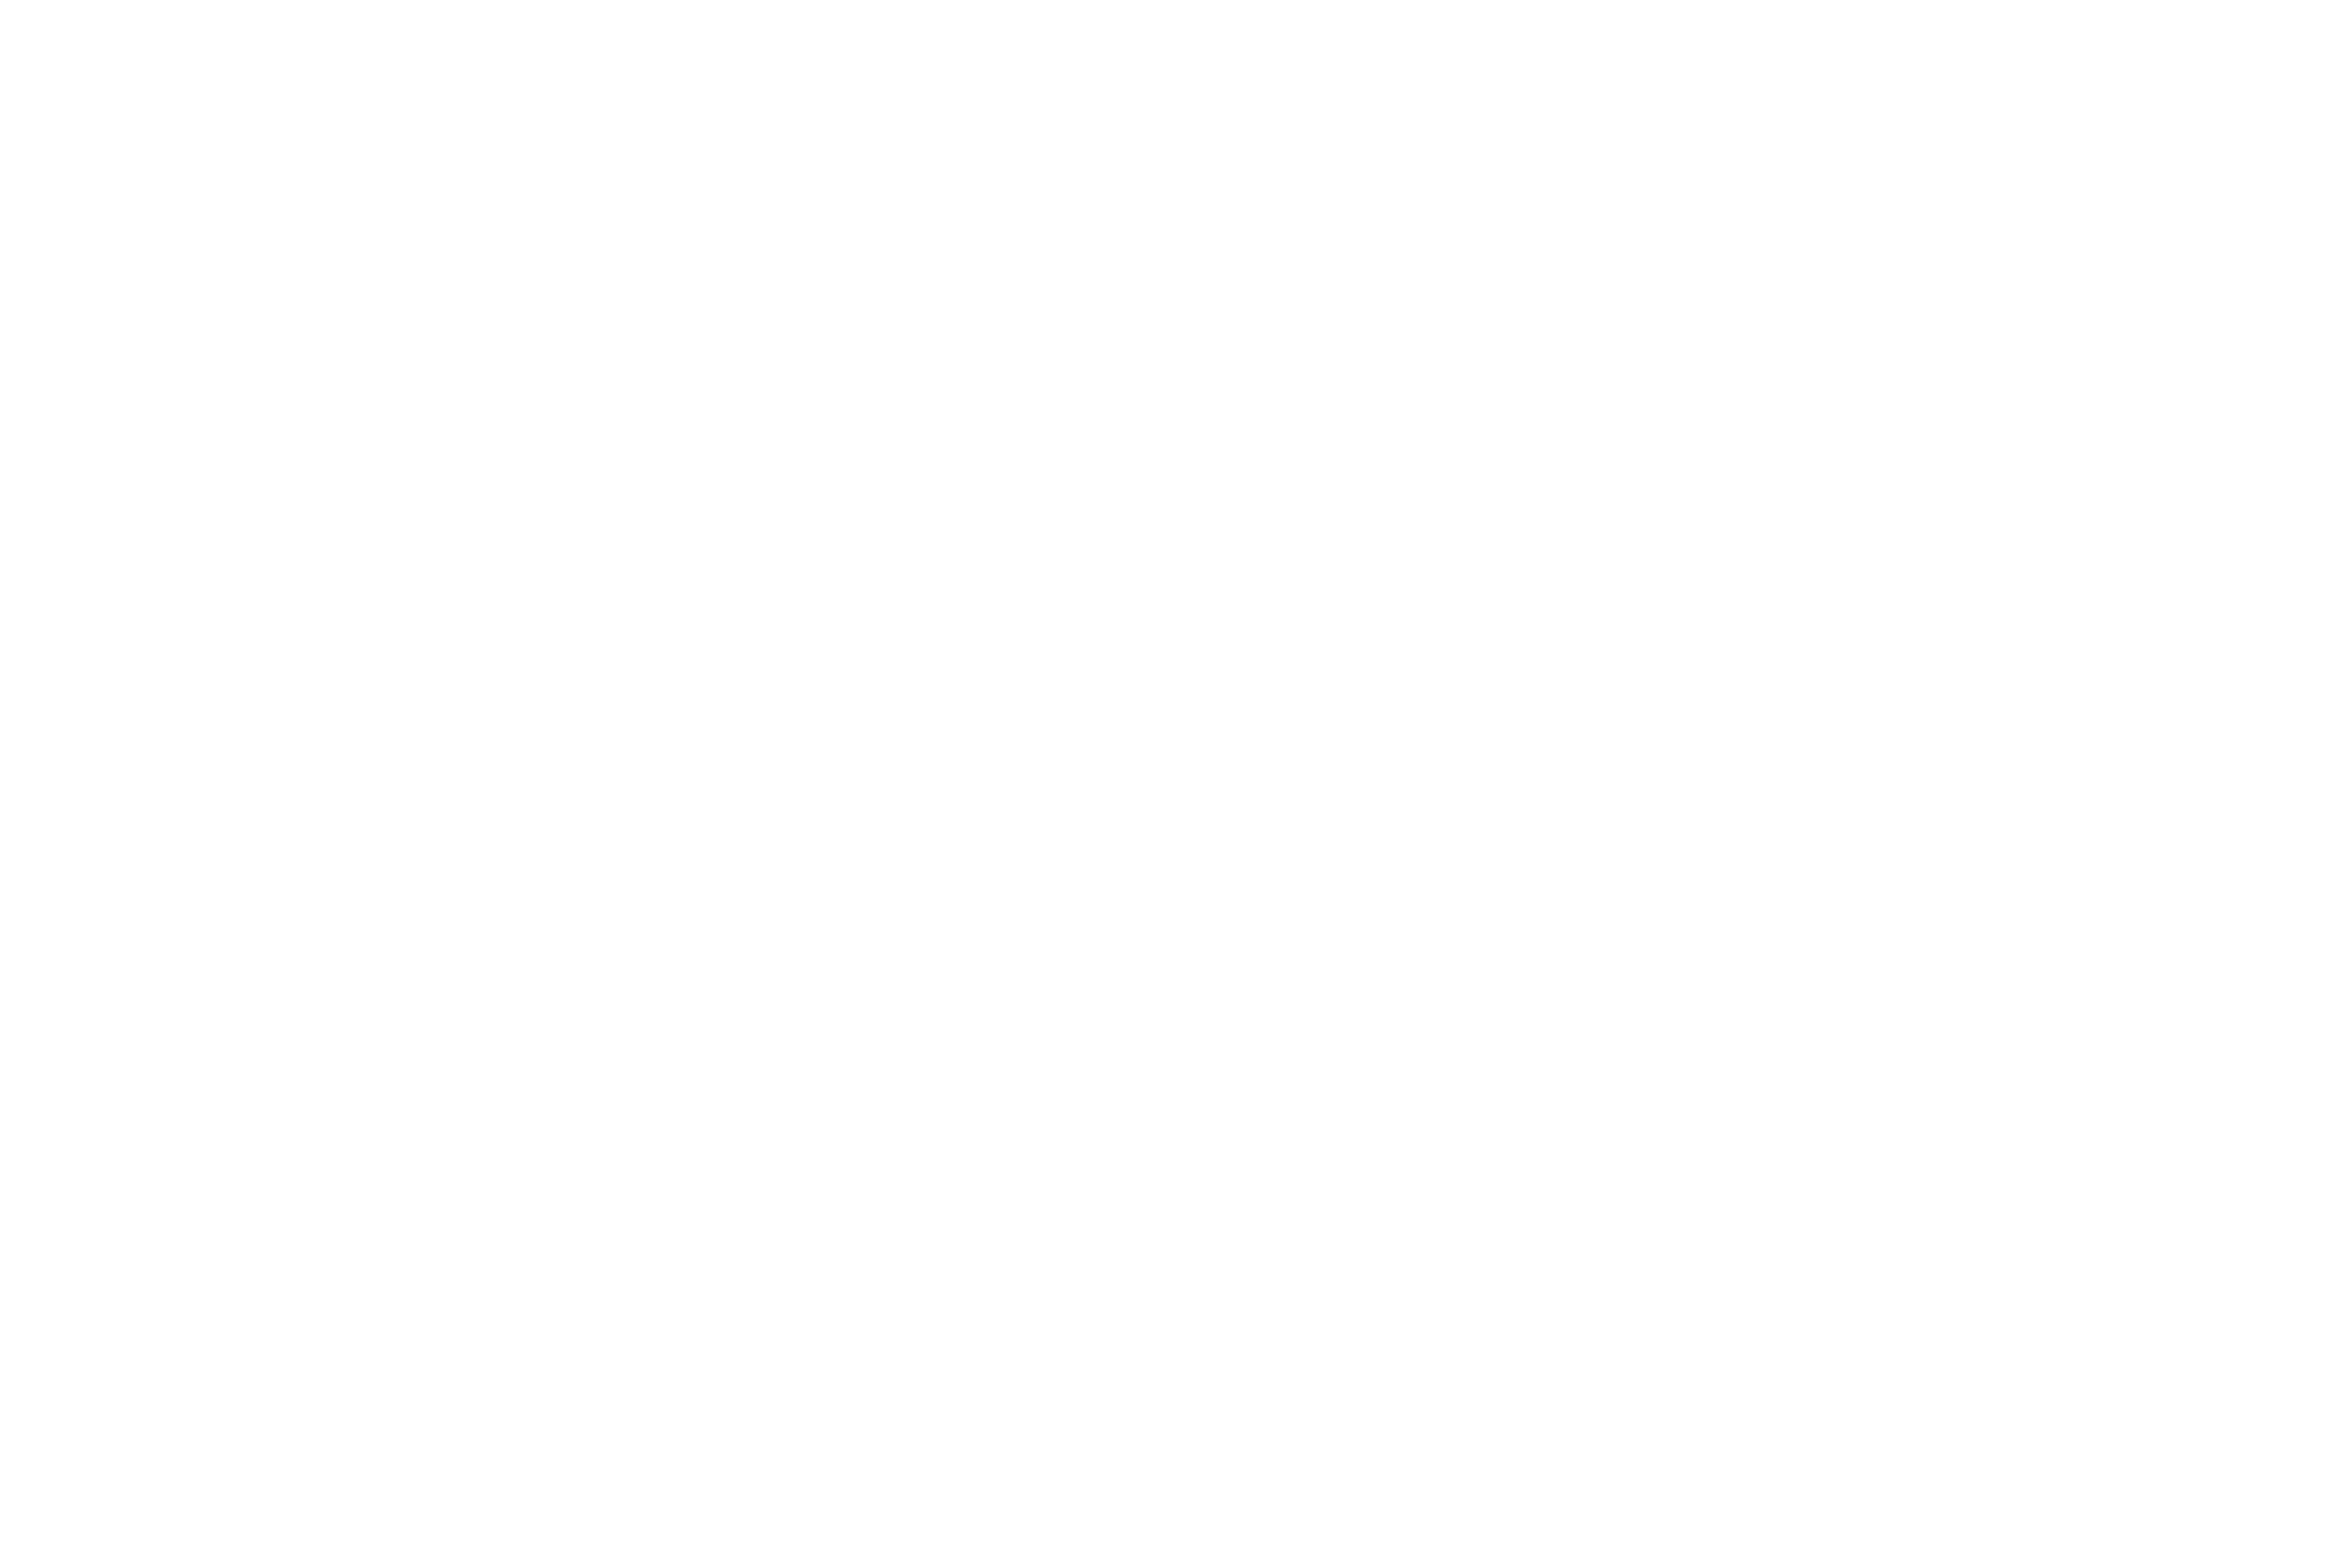 Machines for the automated processing of cables + hoses for wind turbines